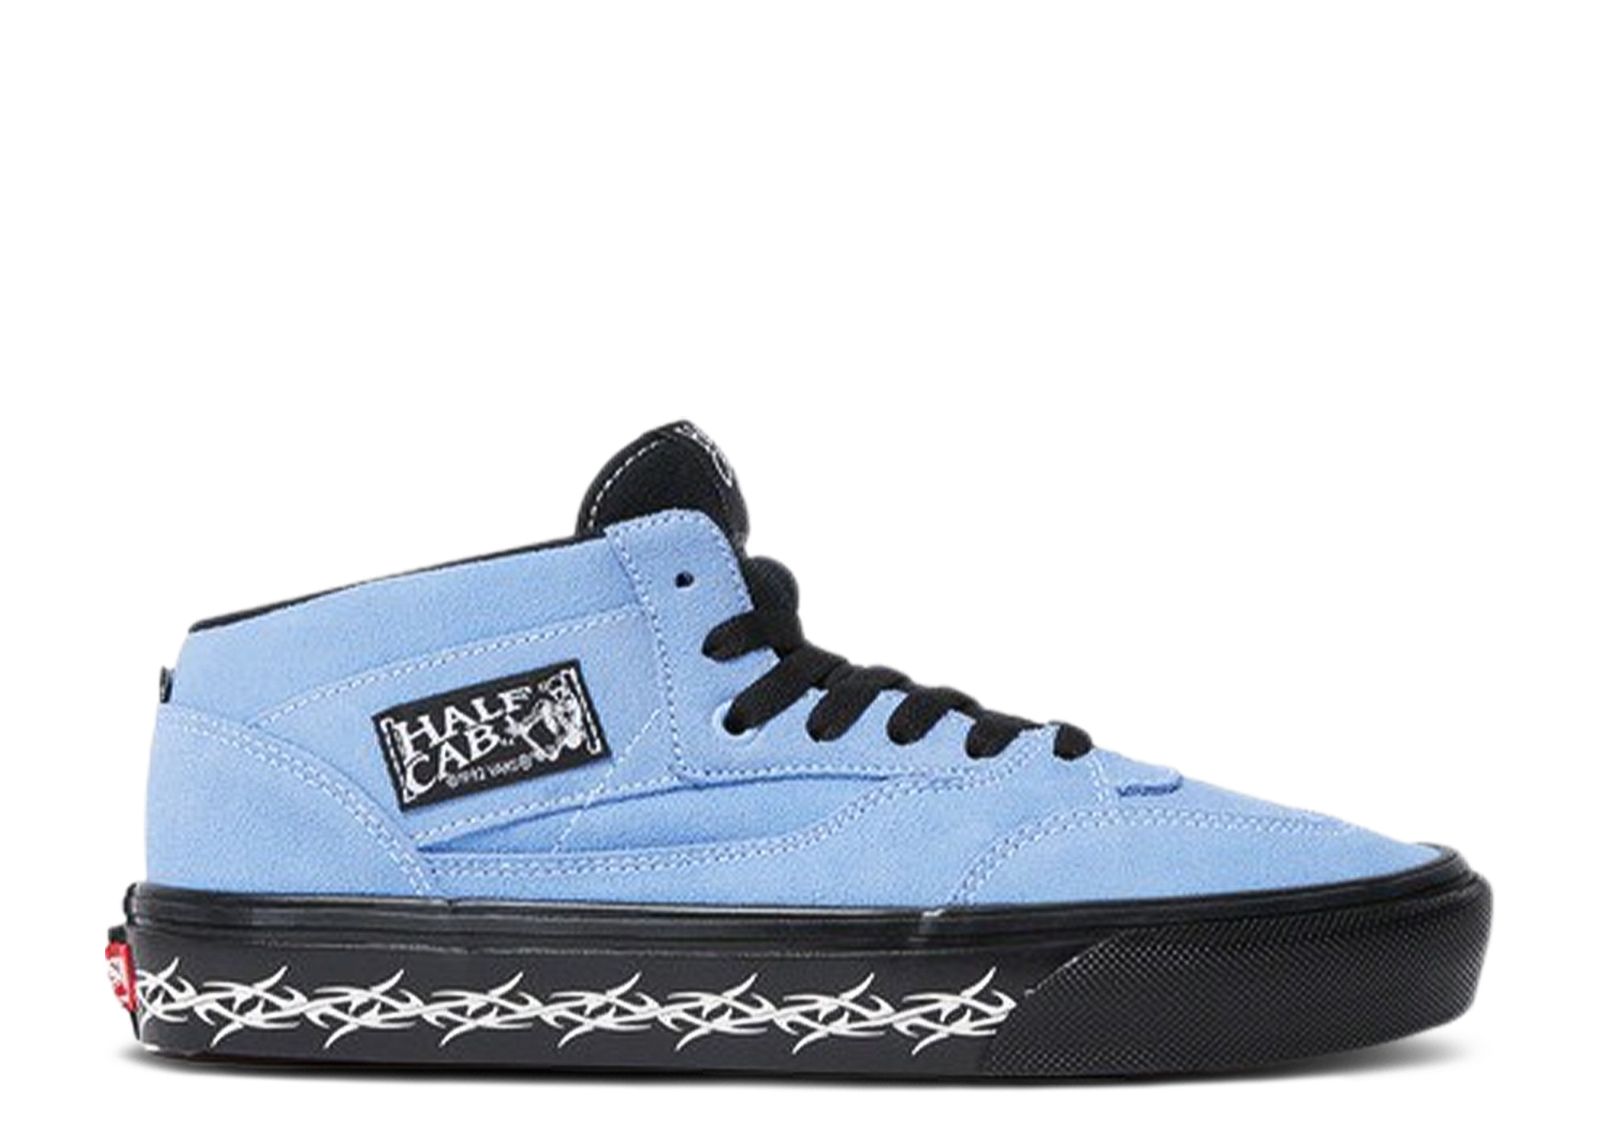 Кроссовки Vans Supreme X Half Cab 'Barbed Wire - Light Blue', синий ce cog 4d barbed suture with l cannula 21g 100mm wire fact lift hilos tensores hskinlift pdo molding fishbone mono thread